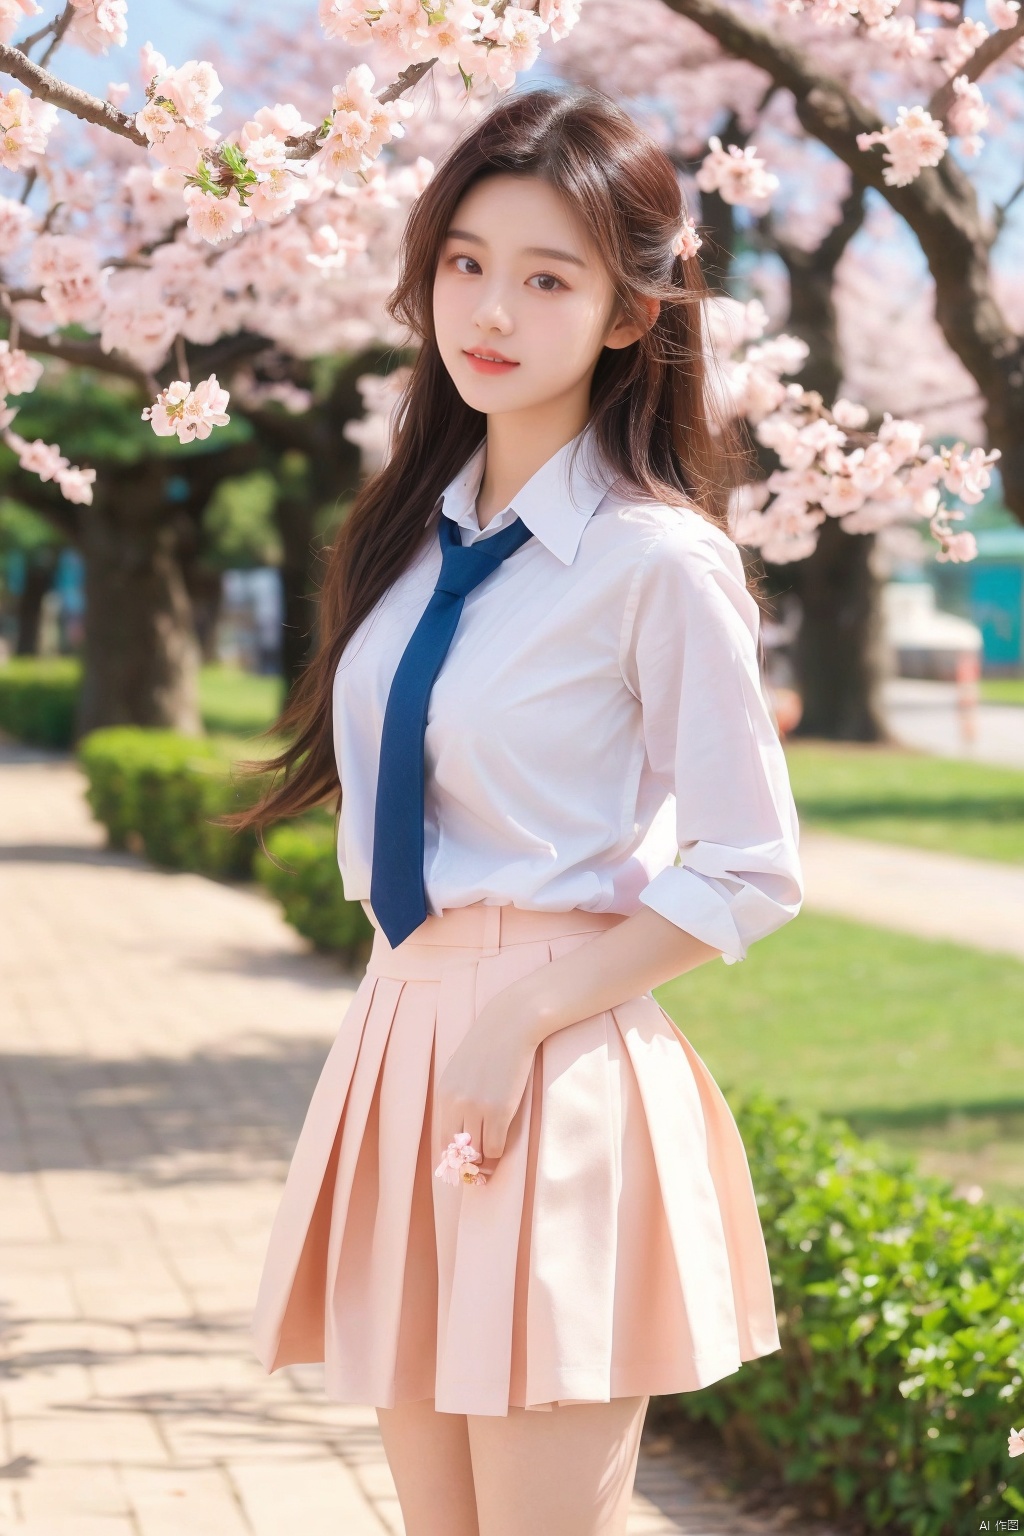  masterpiece,1 Girl,18 years old,Stand,Look at me,Lovely,Sweet,Wearing a school uniform,Students,Tie,Miniskirt,Outdoors,Aisle,Spring,Peach blossom,Flying petals,Long hair,textured skin,super detail,best quality, (\meng ze\)